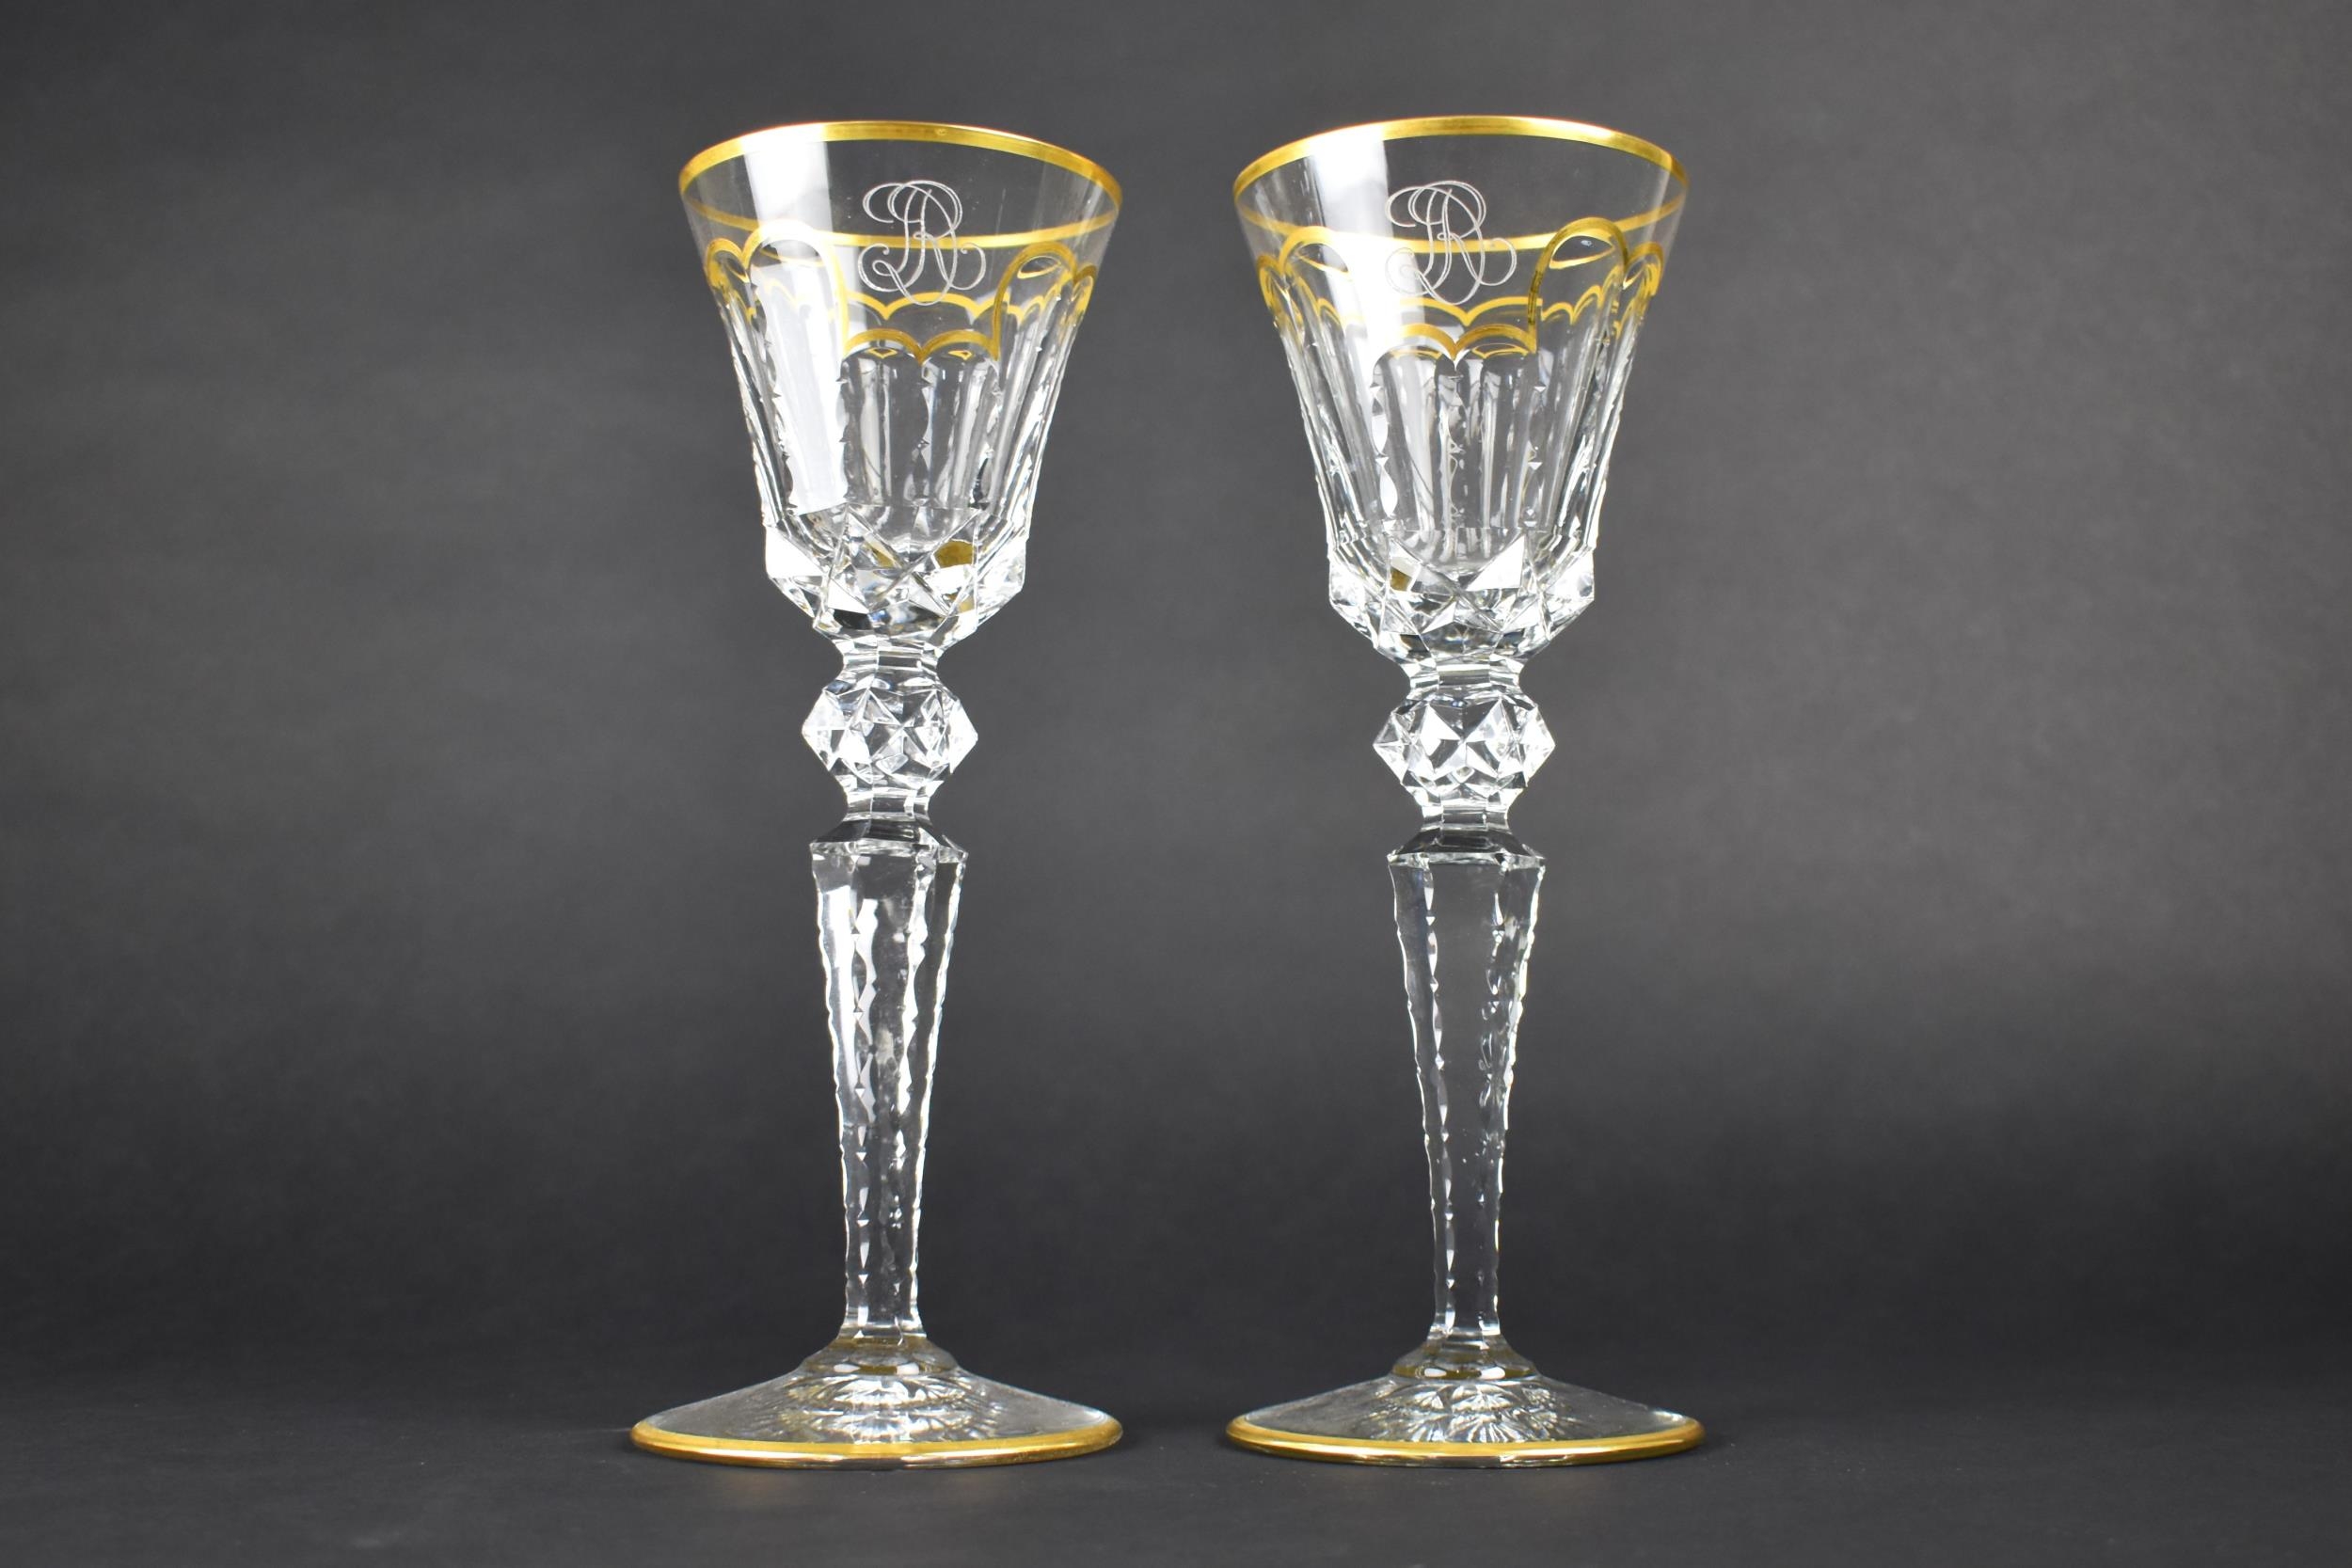 A Pair of St Louis Crystal Wine Glasses, the Facet-Cut Bowls with Gilt Trim and Scalloped Detail,